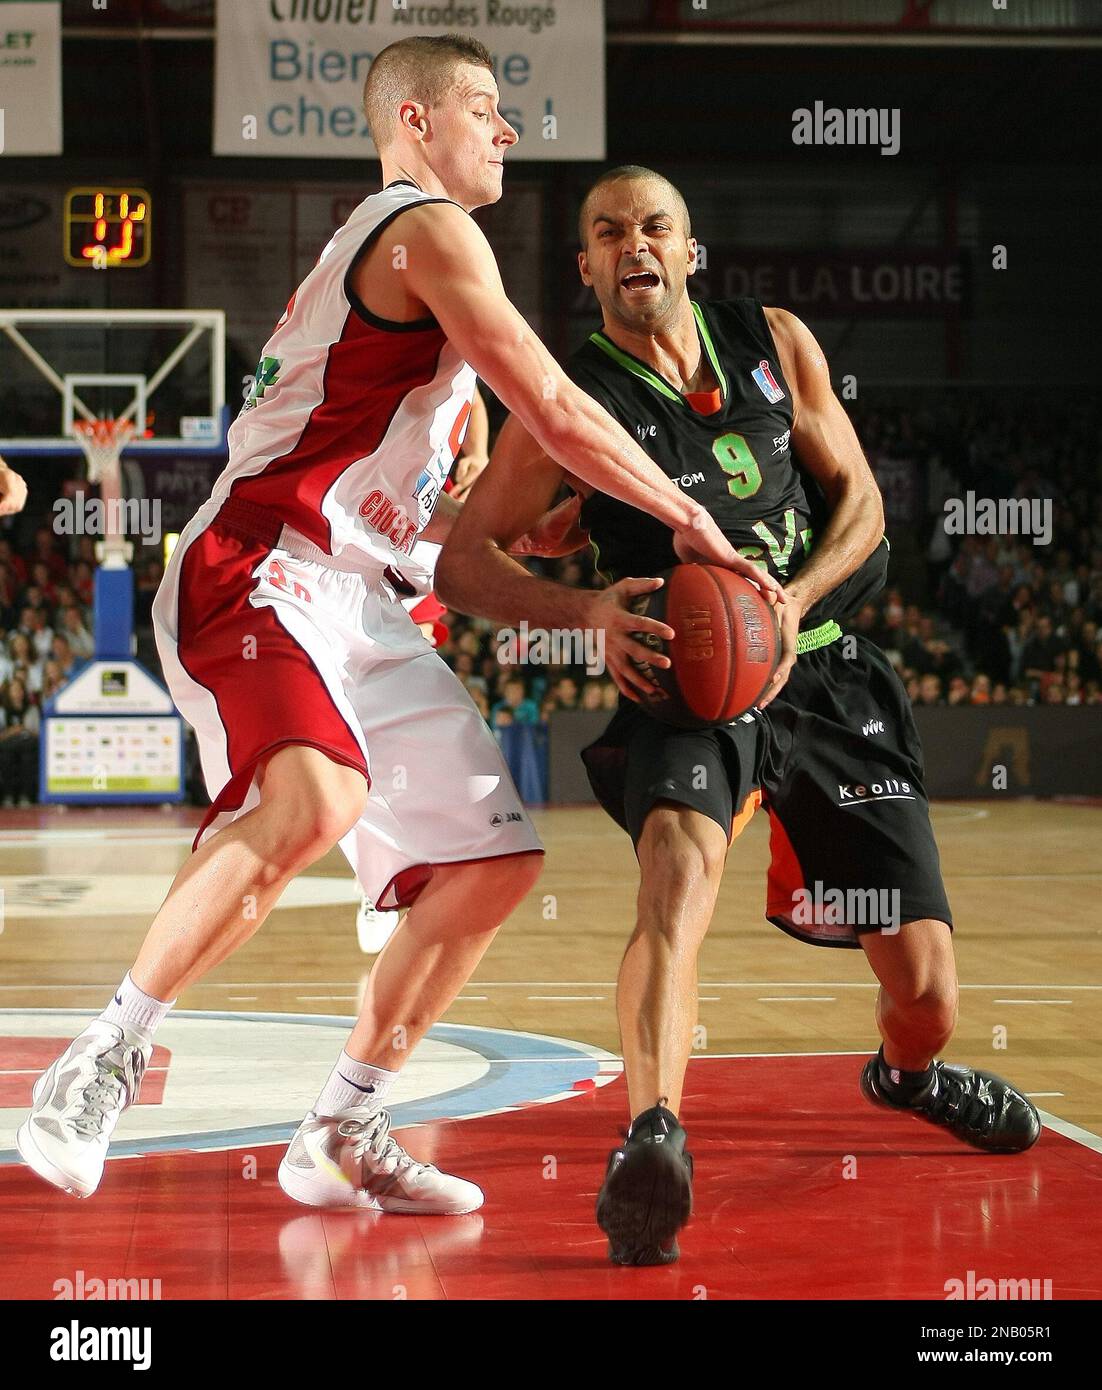 ASVEL's Tony Parker of France drives against Cholet's Donnie McGrath during  their French ProA basketball match in Cholet, western France France,  Saturday, Oct. 29, 2011. Vice President of the club, Parker will